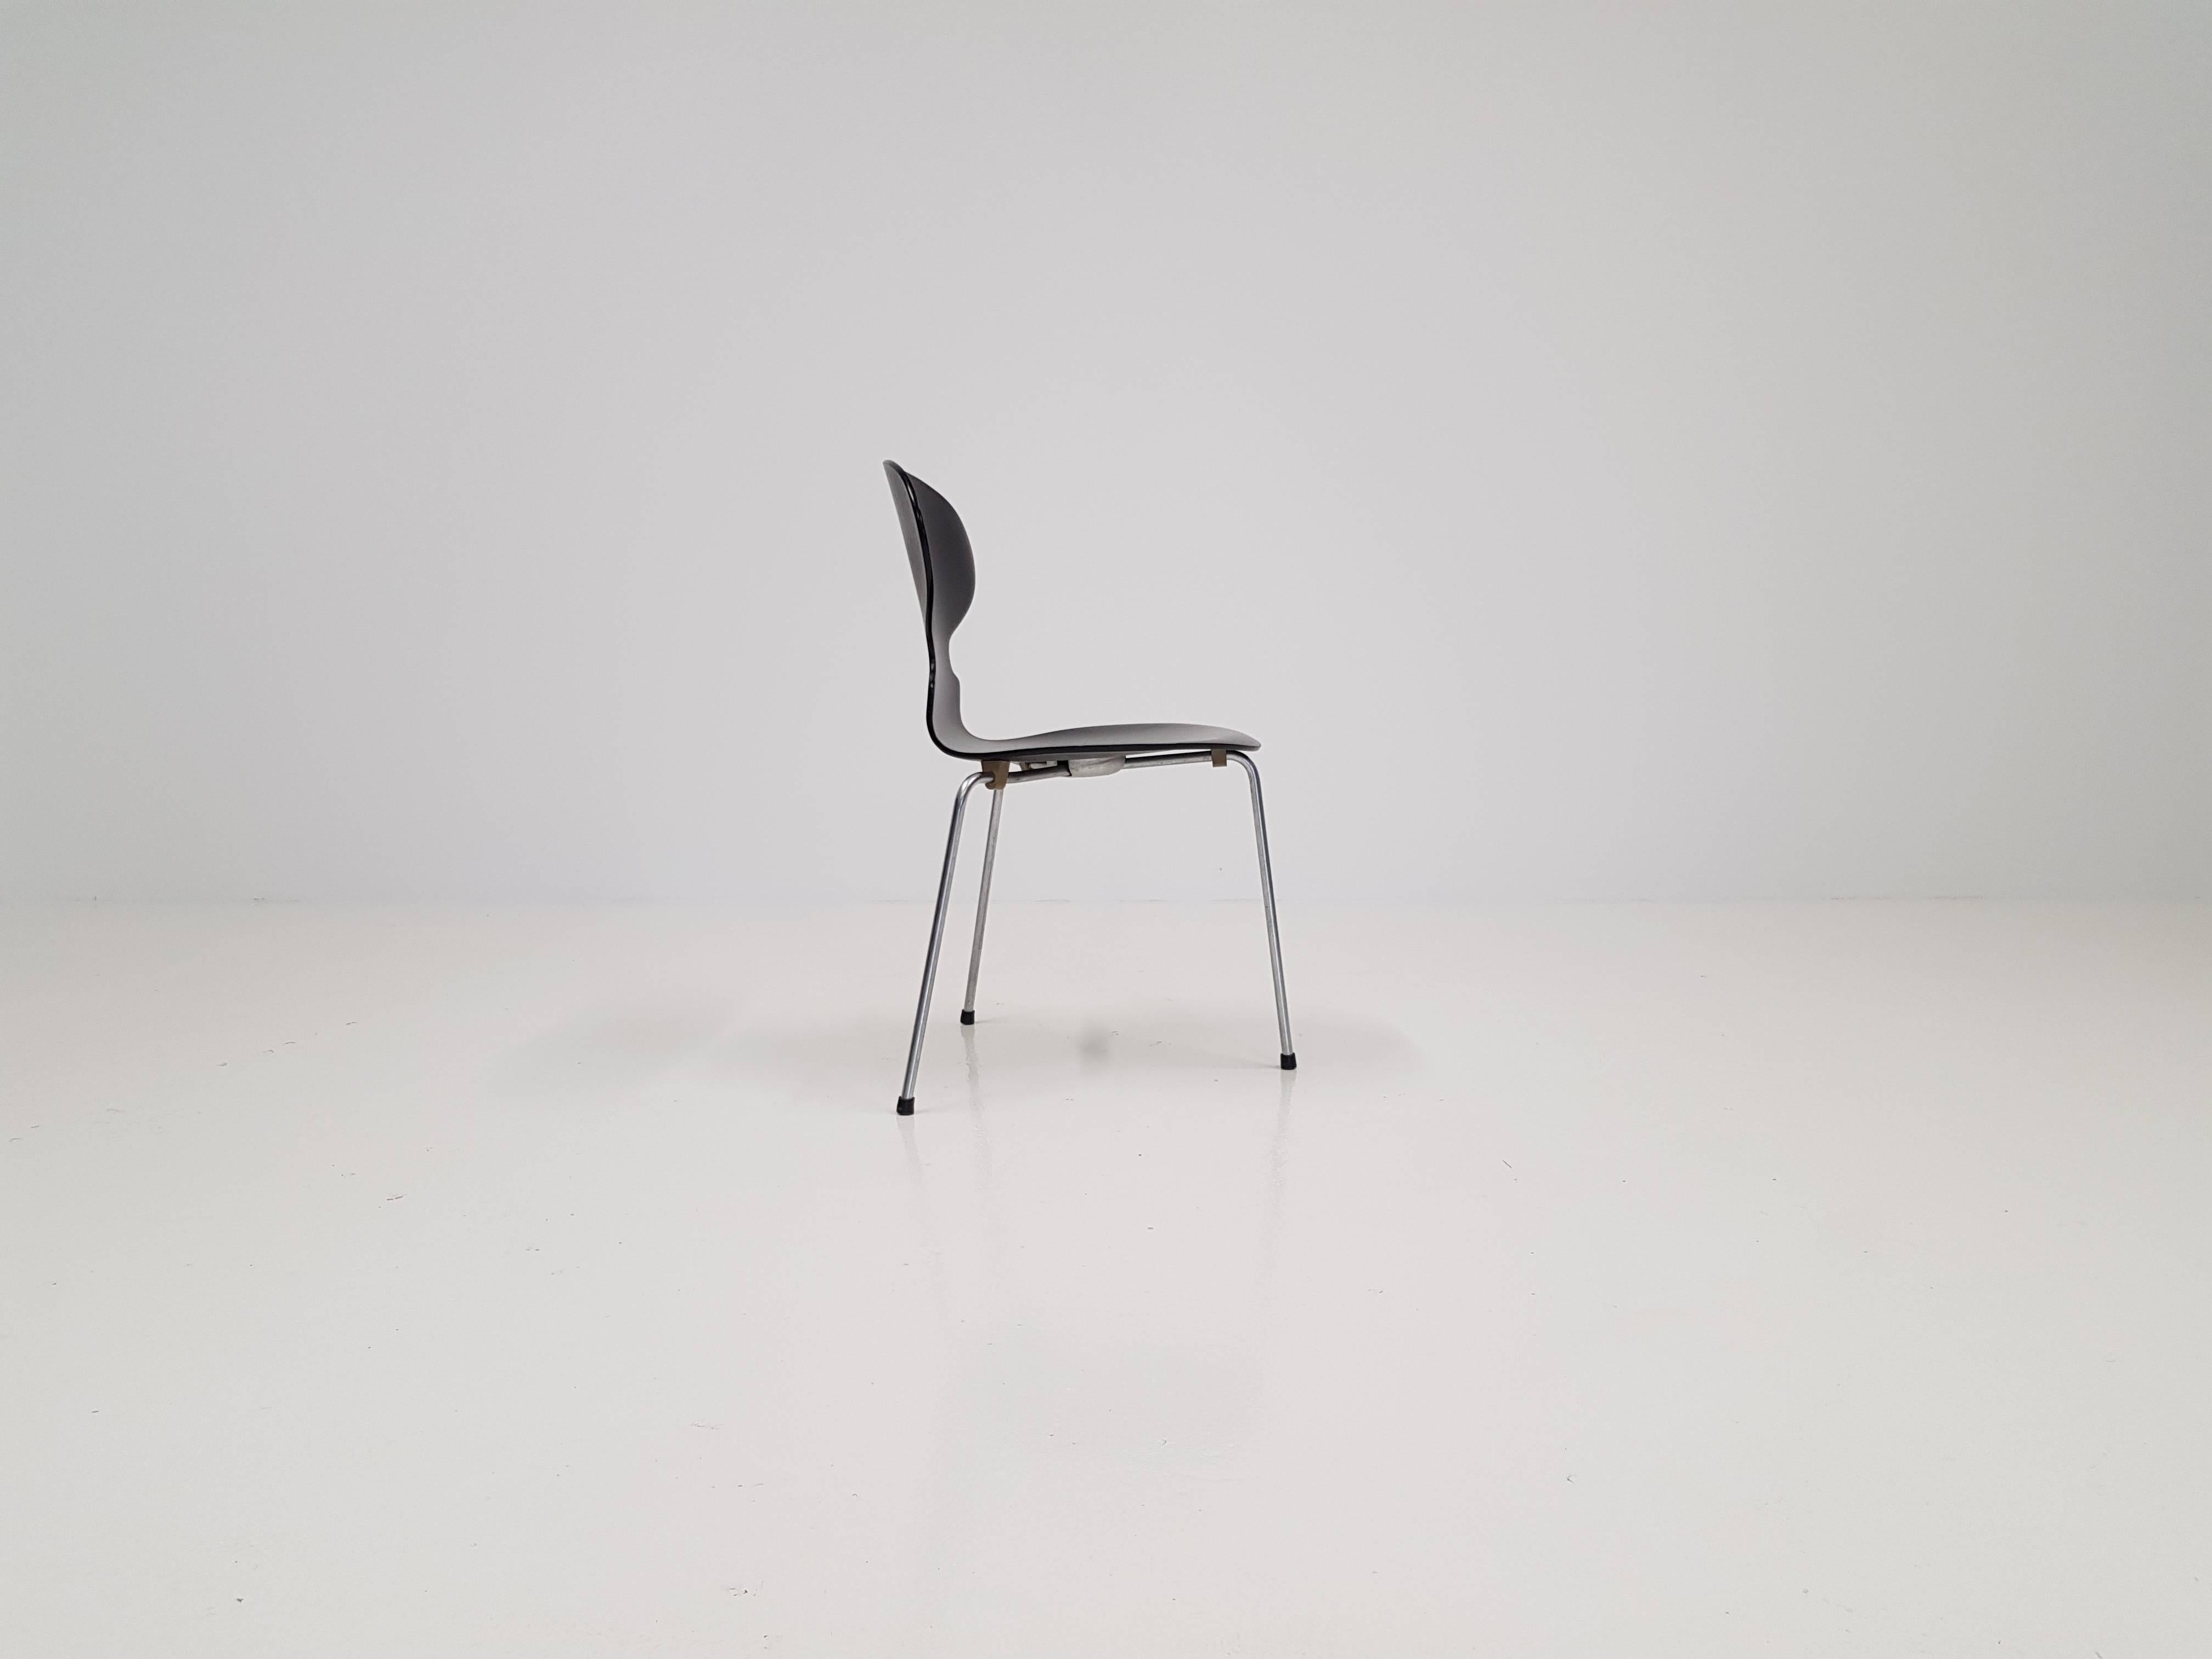 Iconic model 3100 'Ant' chair by Arne Jacobsen for Fritz Hansen.

Model 3100 'Ant' chairs were designed by Arne Jacobsen in 1952. This piece produced in 1965. Black lacquered bentwood on steel frame.

Condition: Wear commensurate with age and